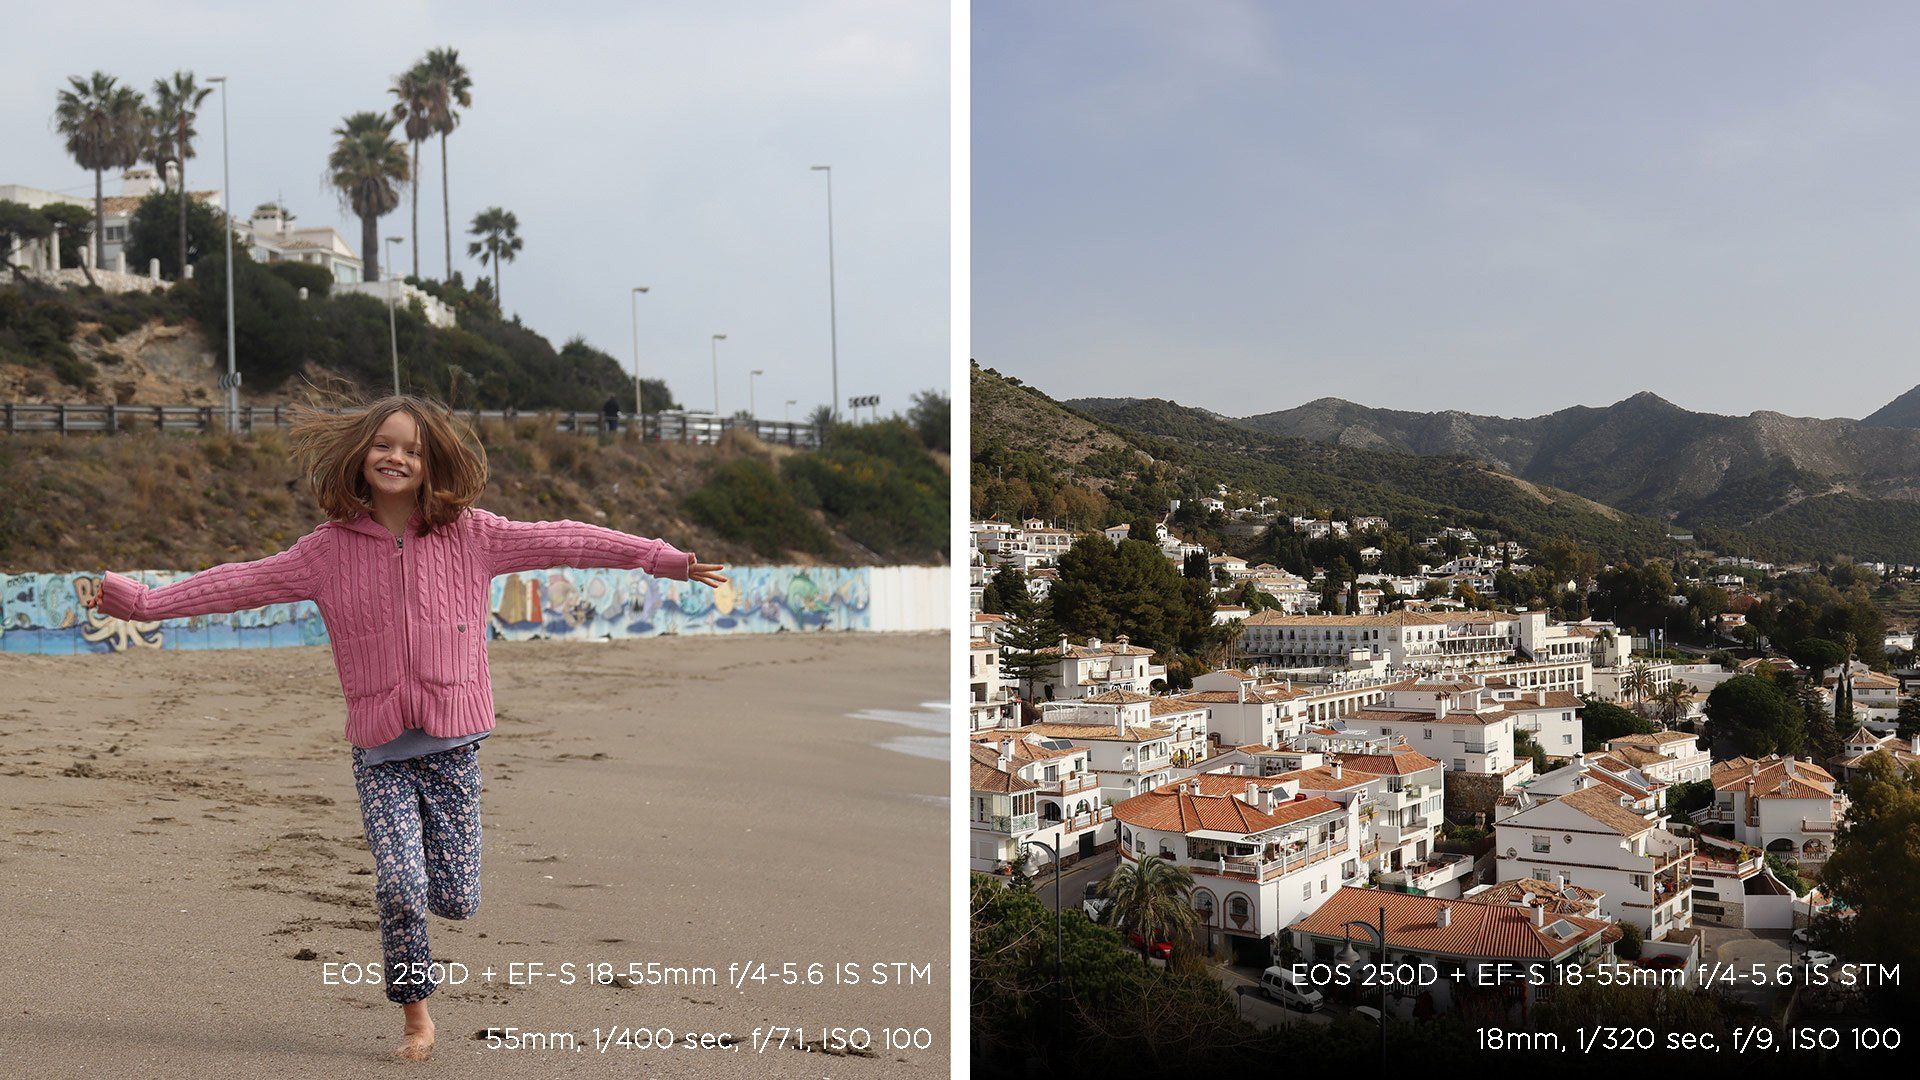 A composite picture: a girl runs towards us on a sandy beach in one; a view of a mountaintop village in the other. Photos taken on a Canon EOS 250D.